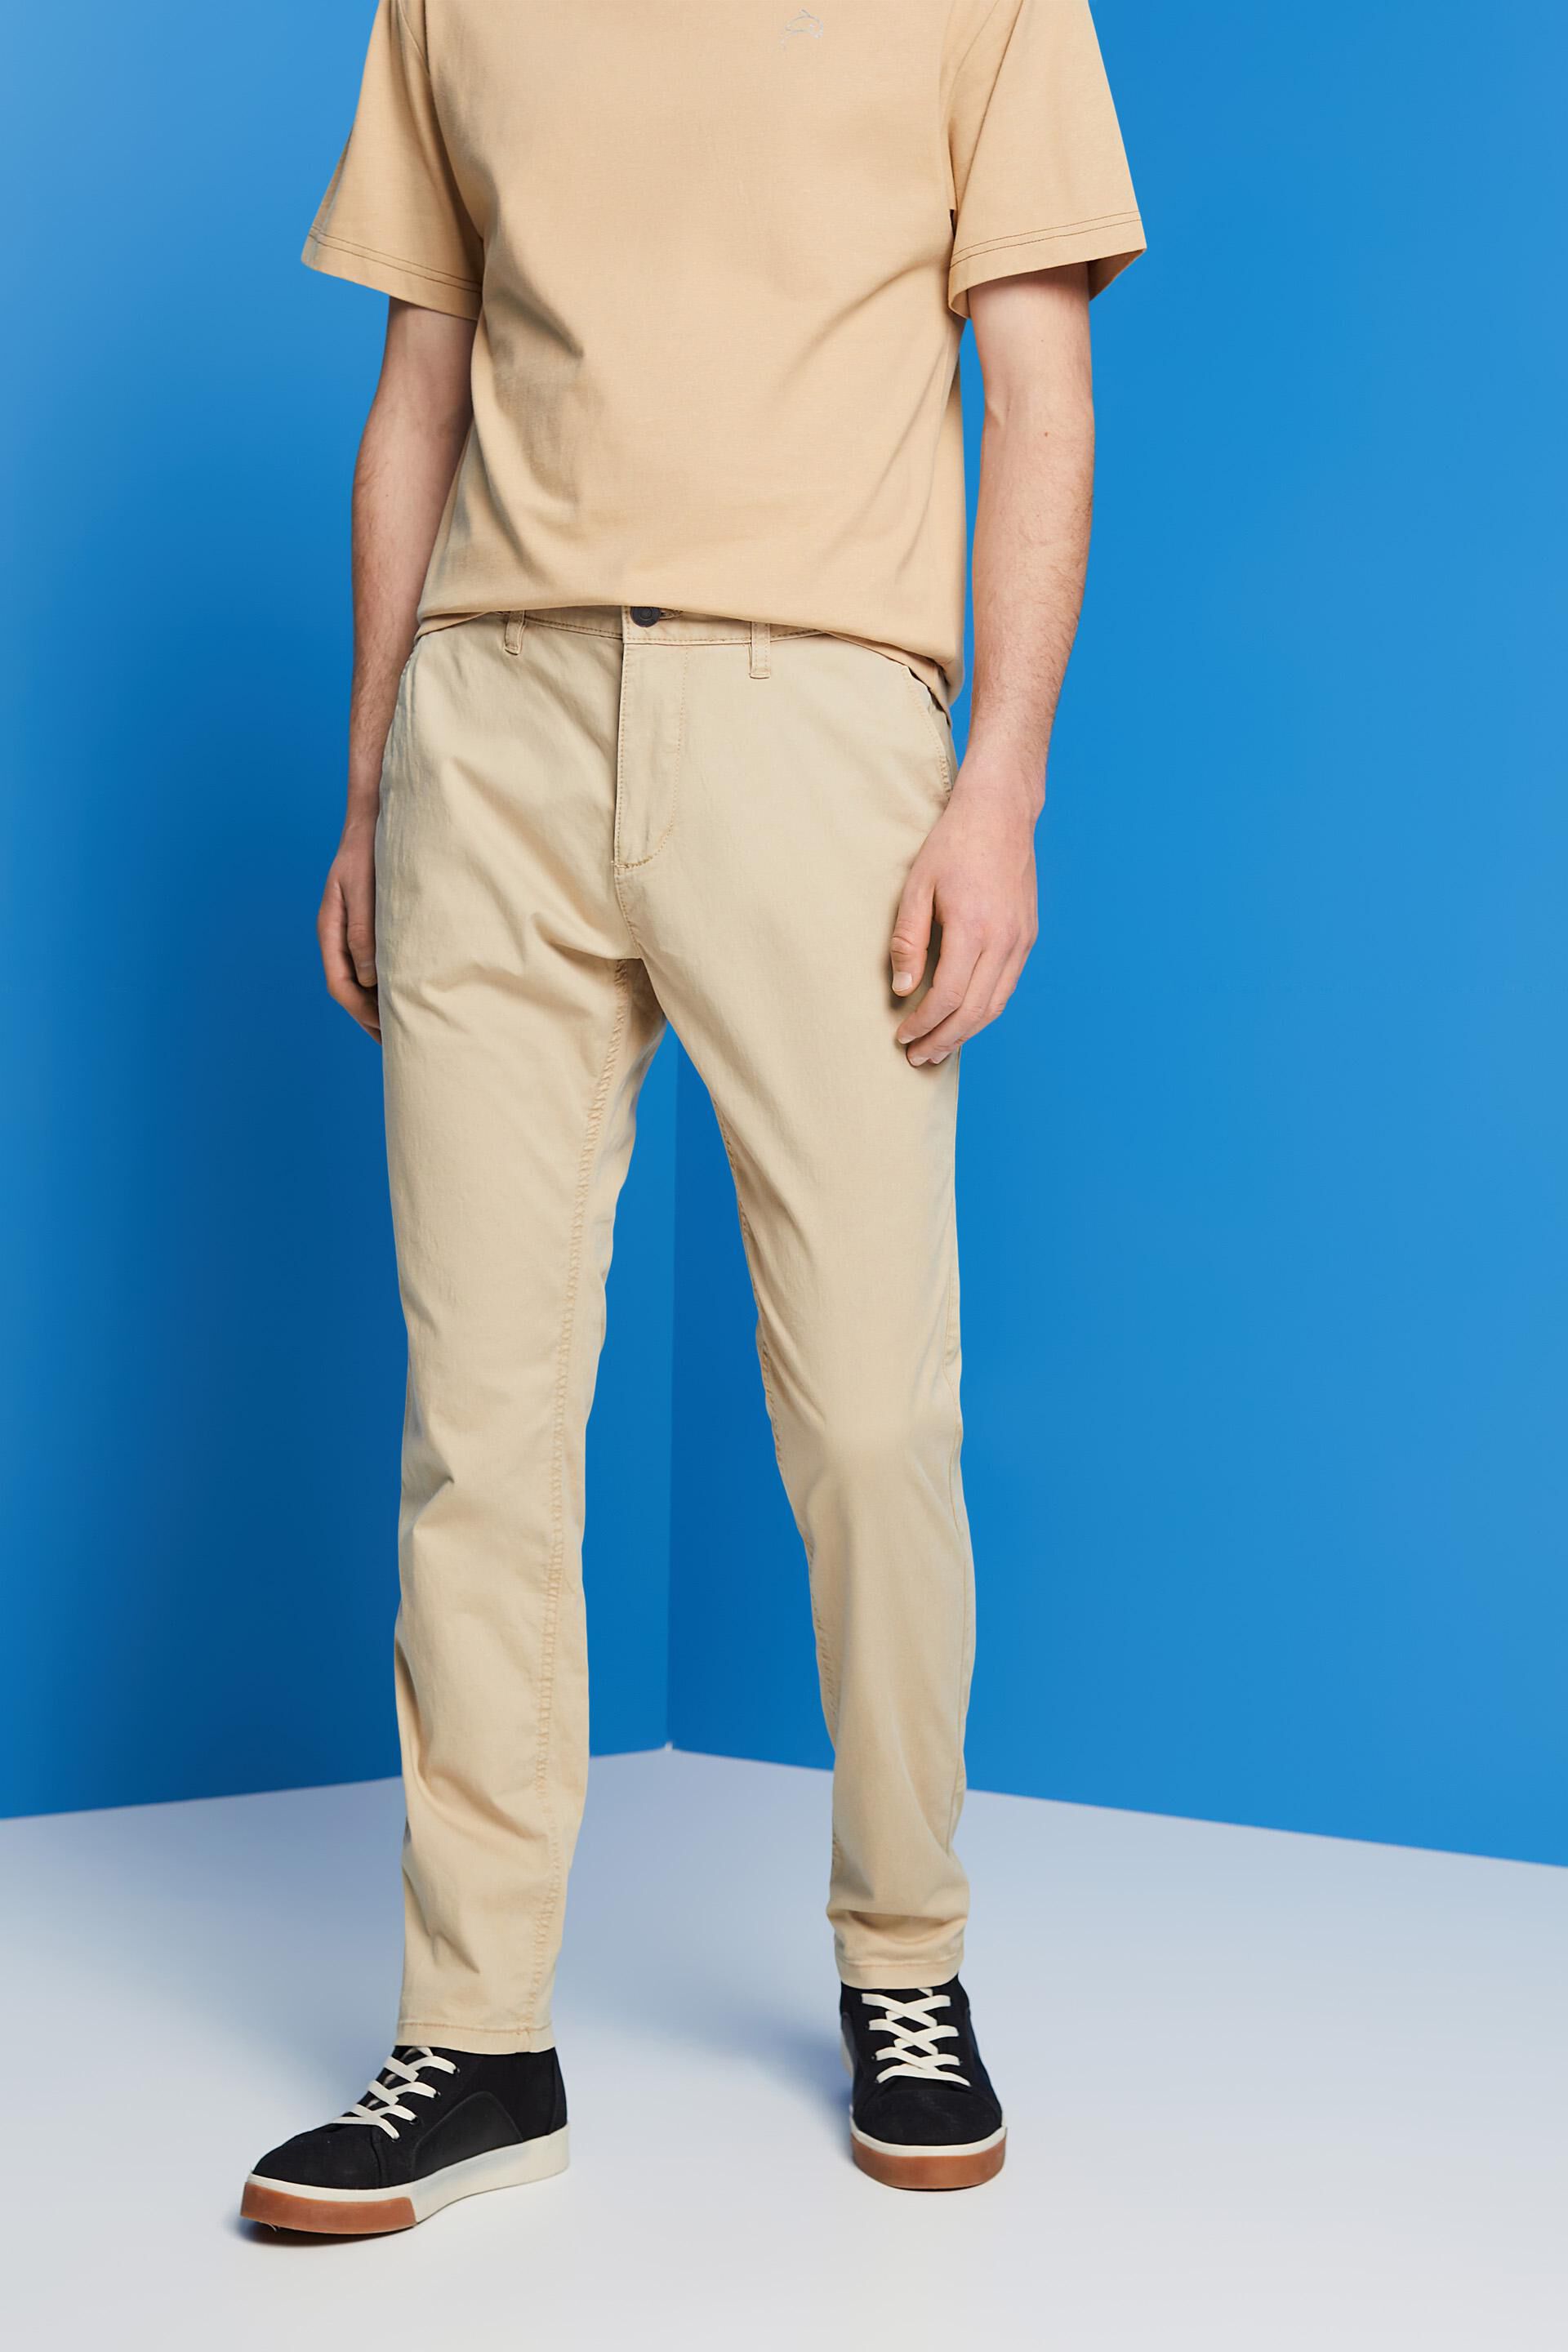 Esprit Mens trousers 230Camel  New Version  Amazoncombe Fashion